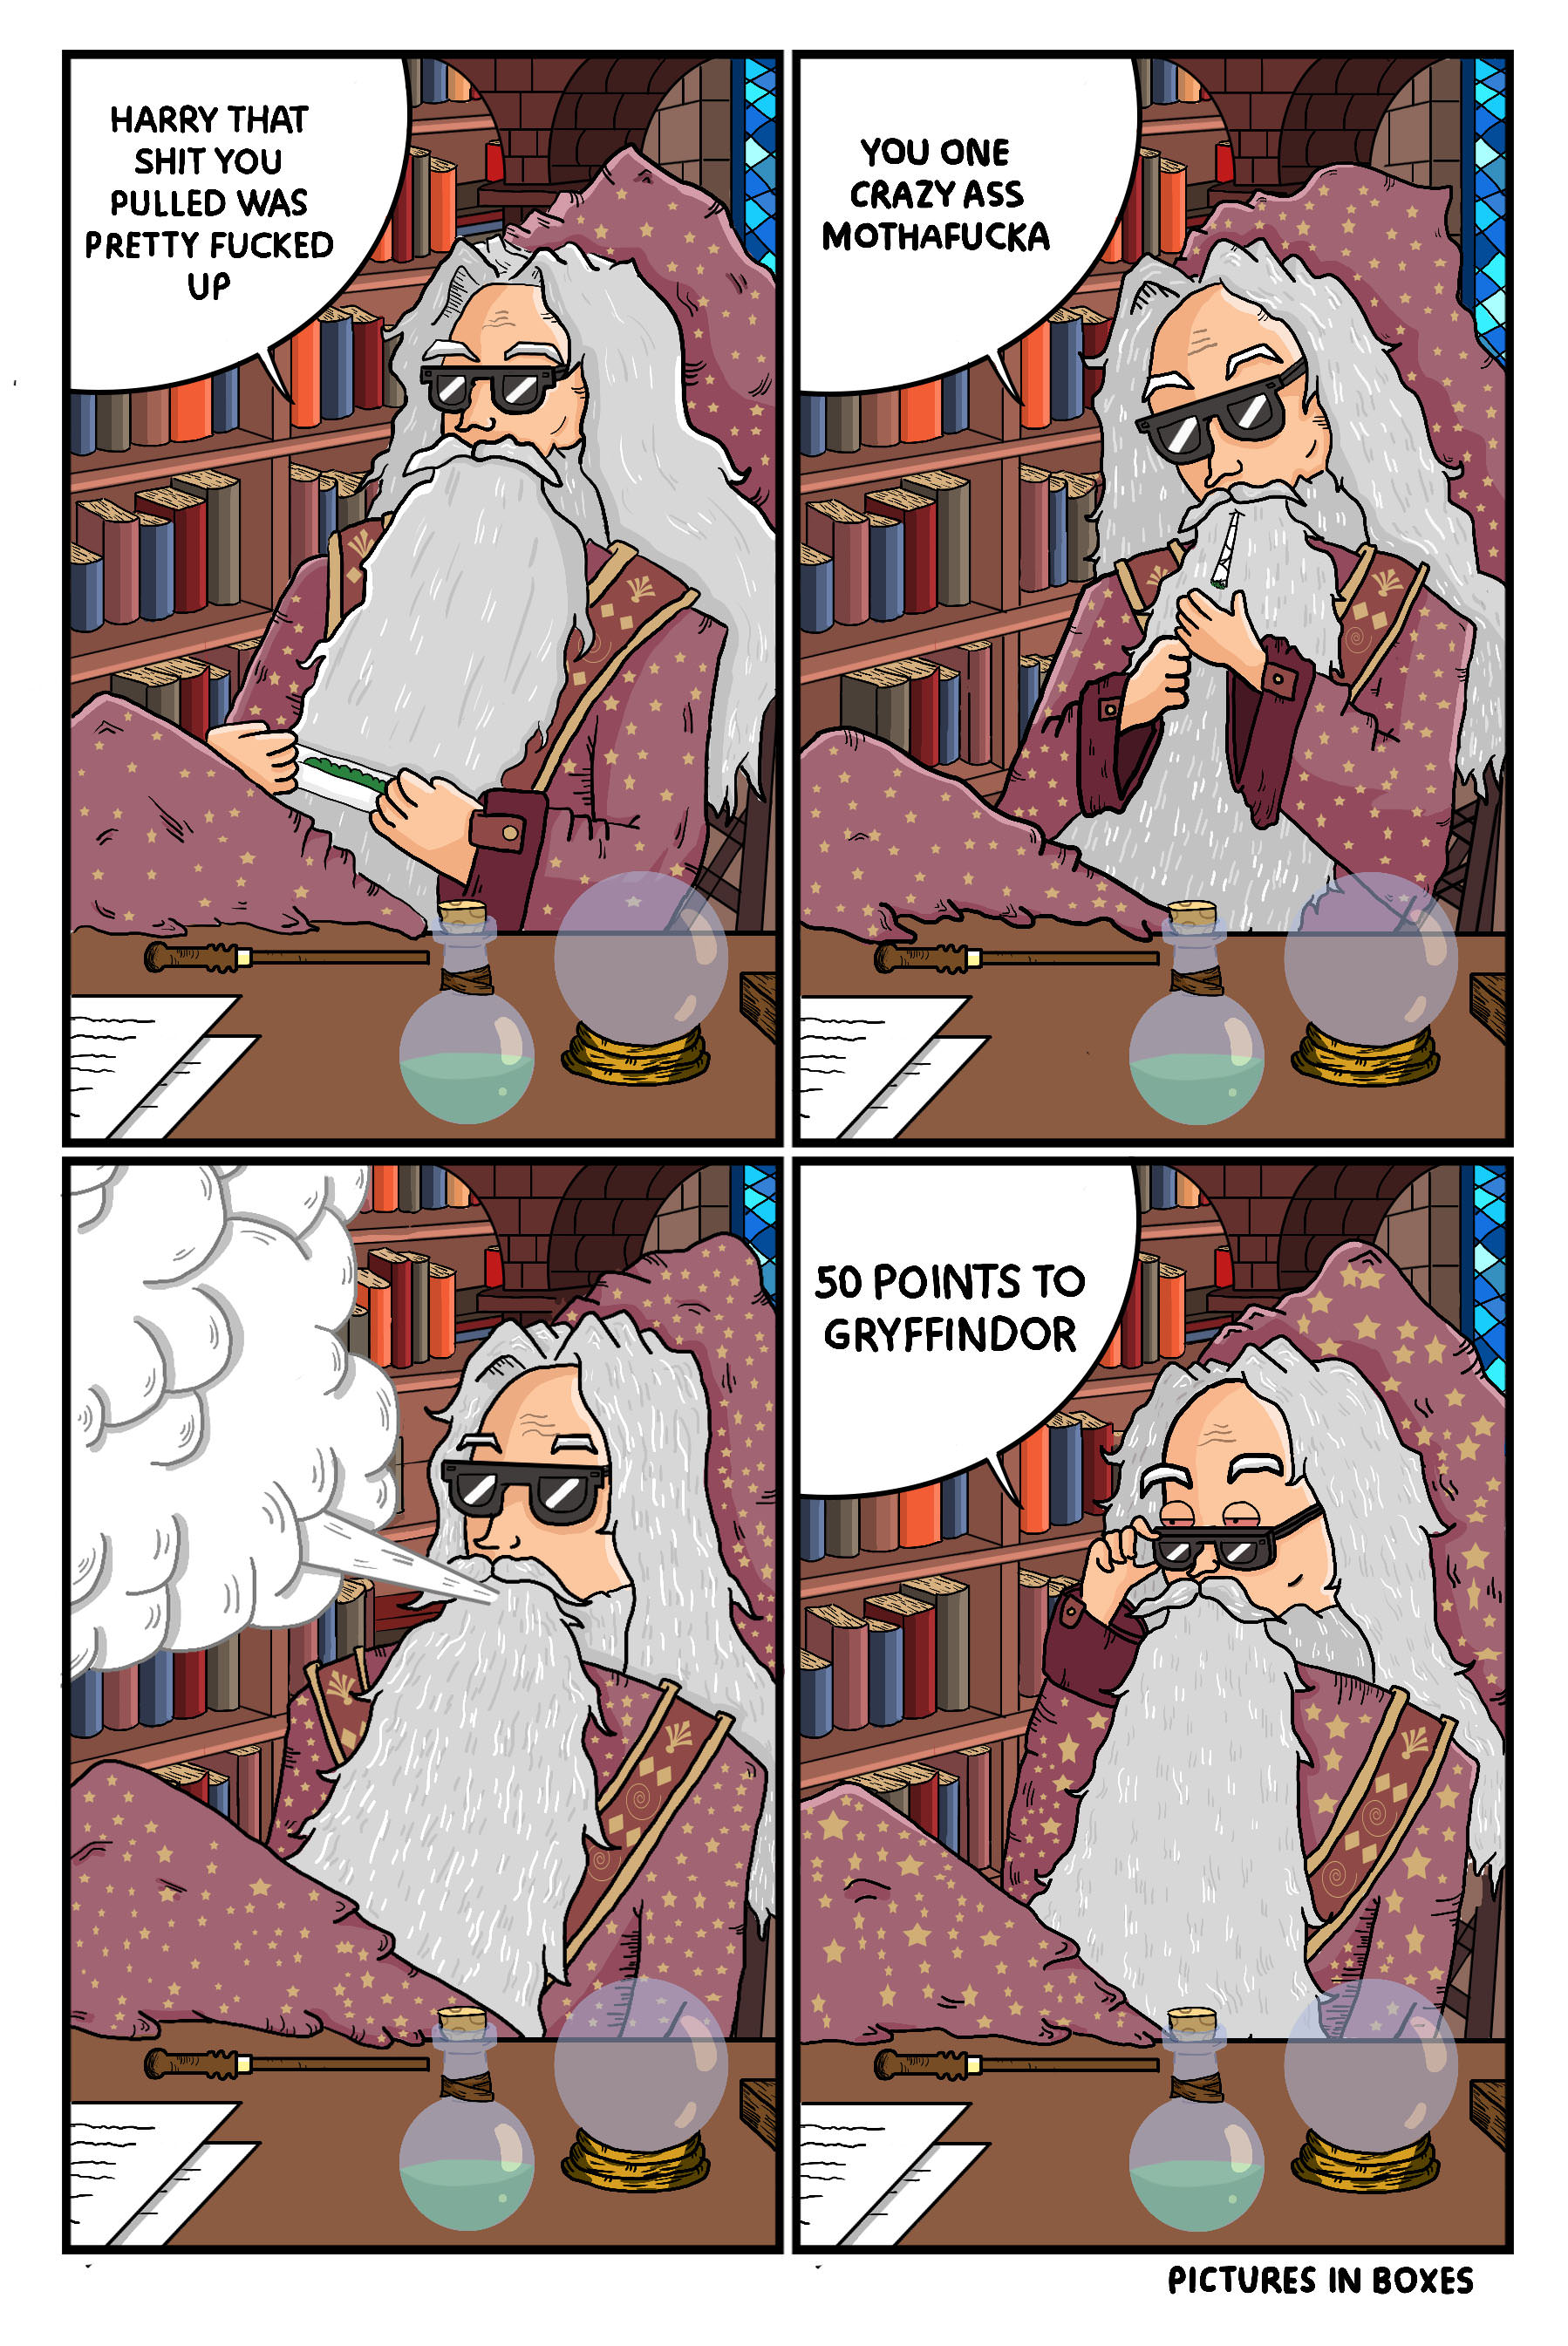 stoned dumbledore comic - Harry That Shit You Pullid Was Pretty Fucked You One Crazy Ass Motharucea 50 Points To Gryffindor Pictures In Bokes